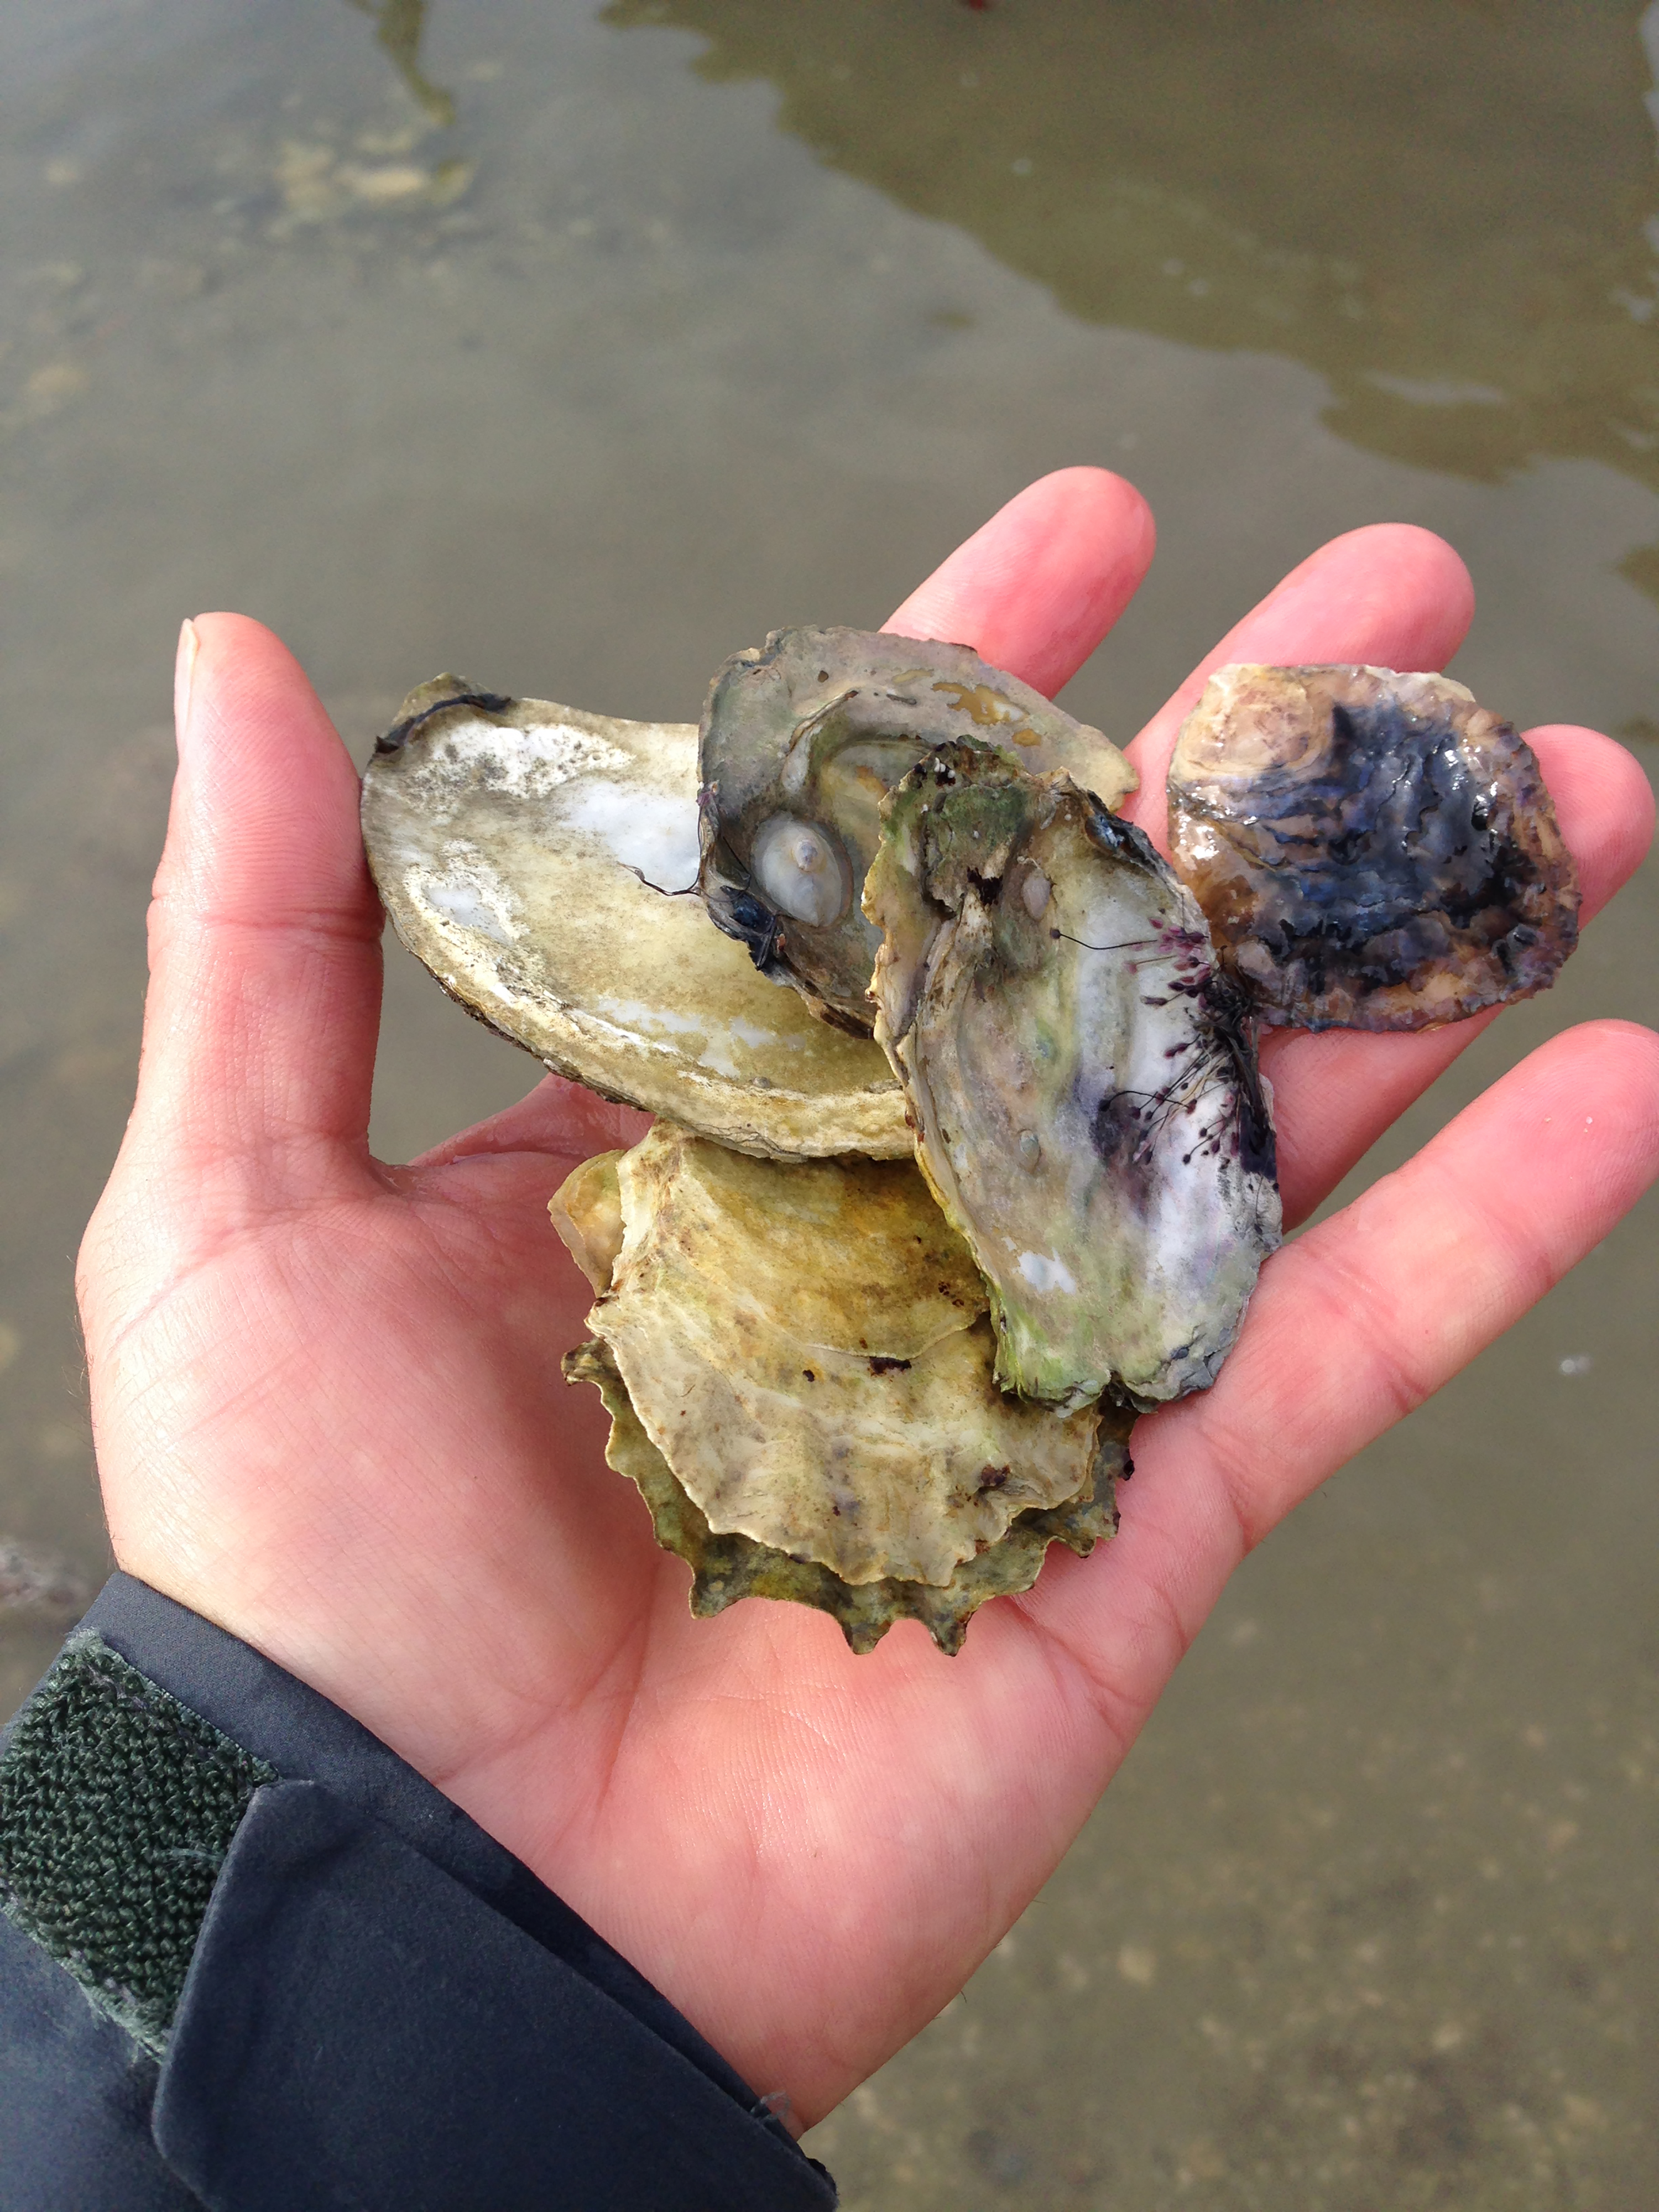 Closeup of a hand holding oyster shells.